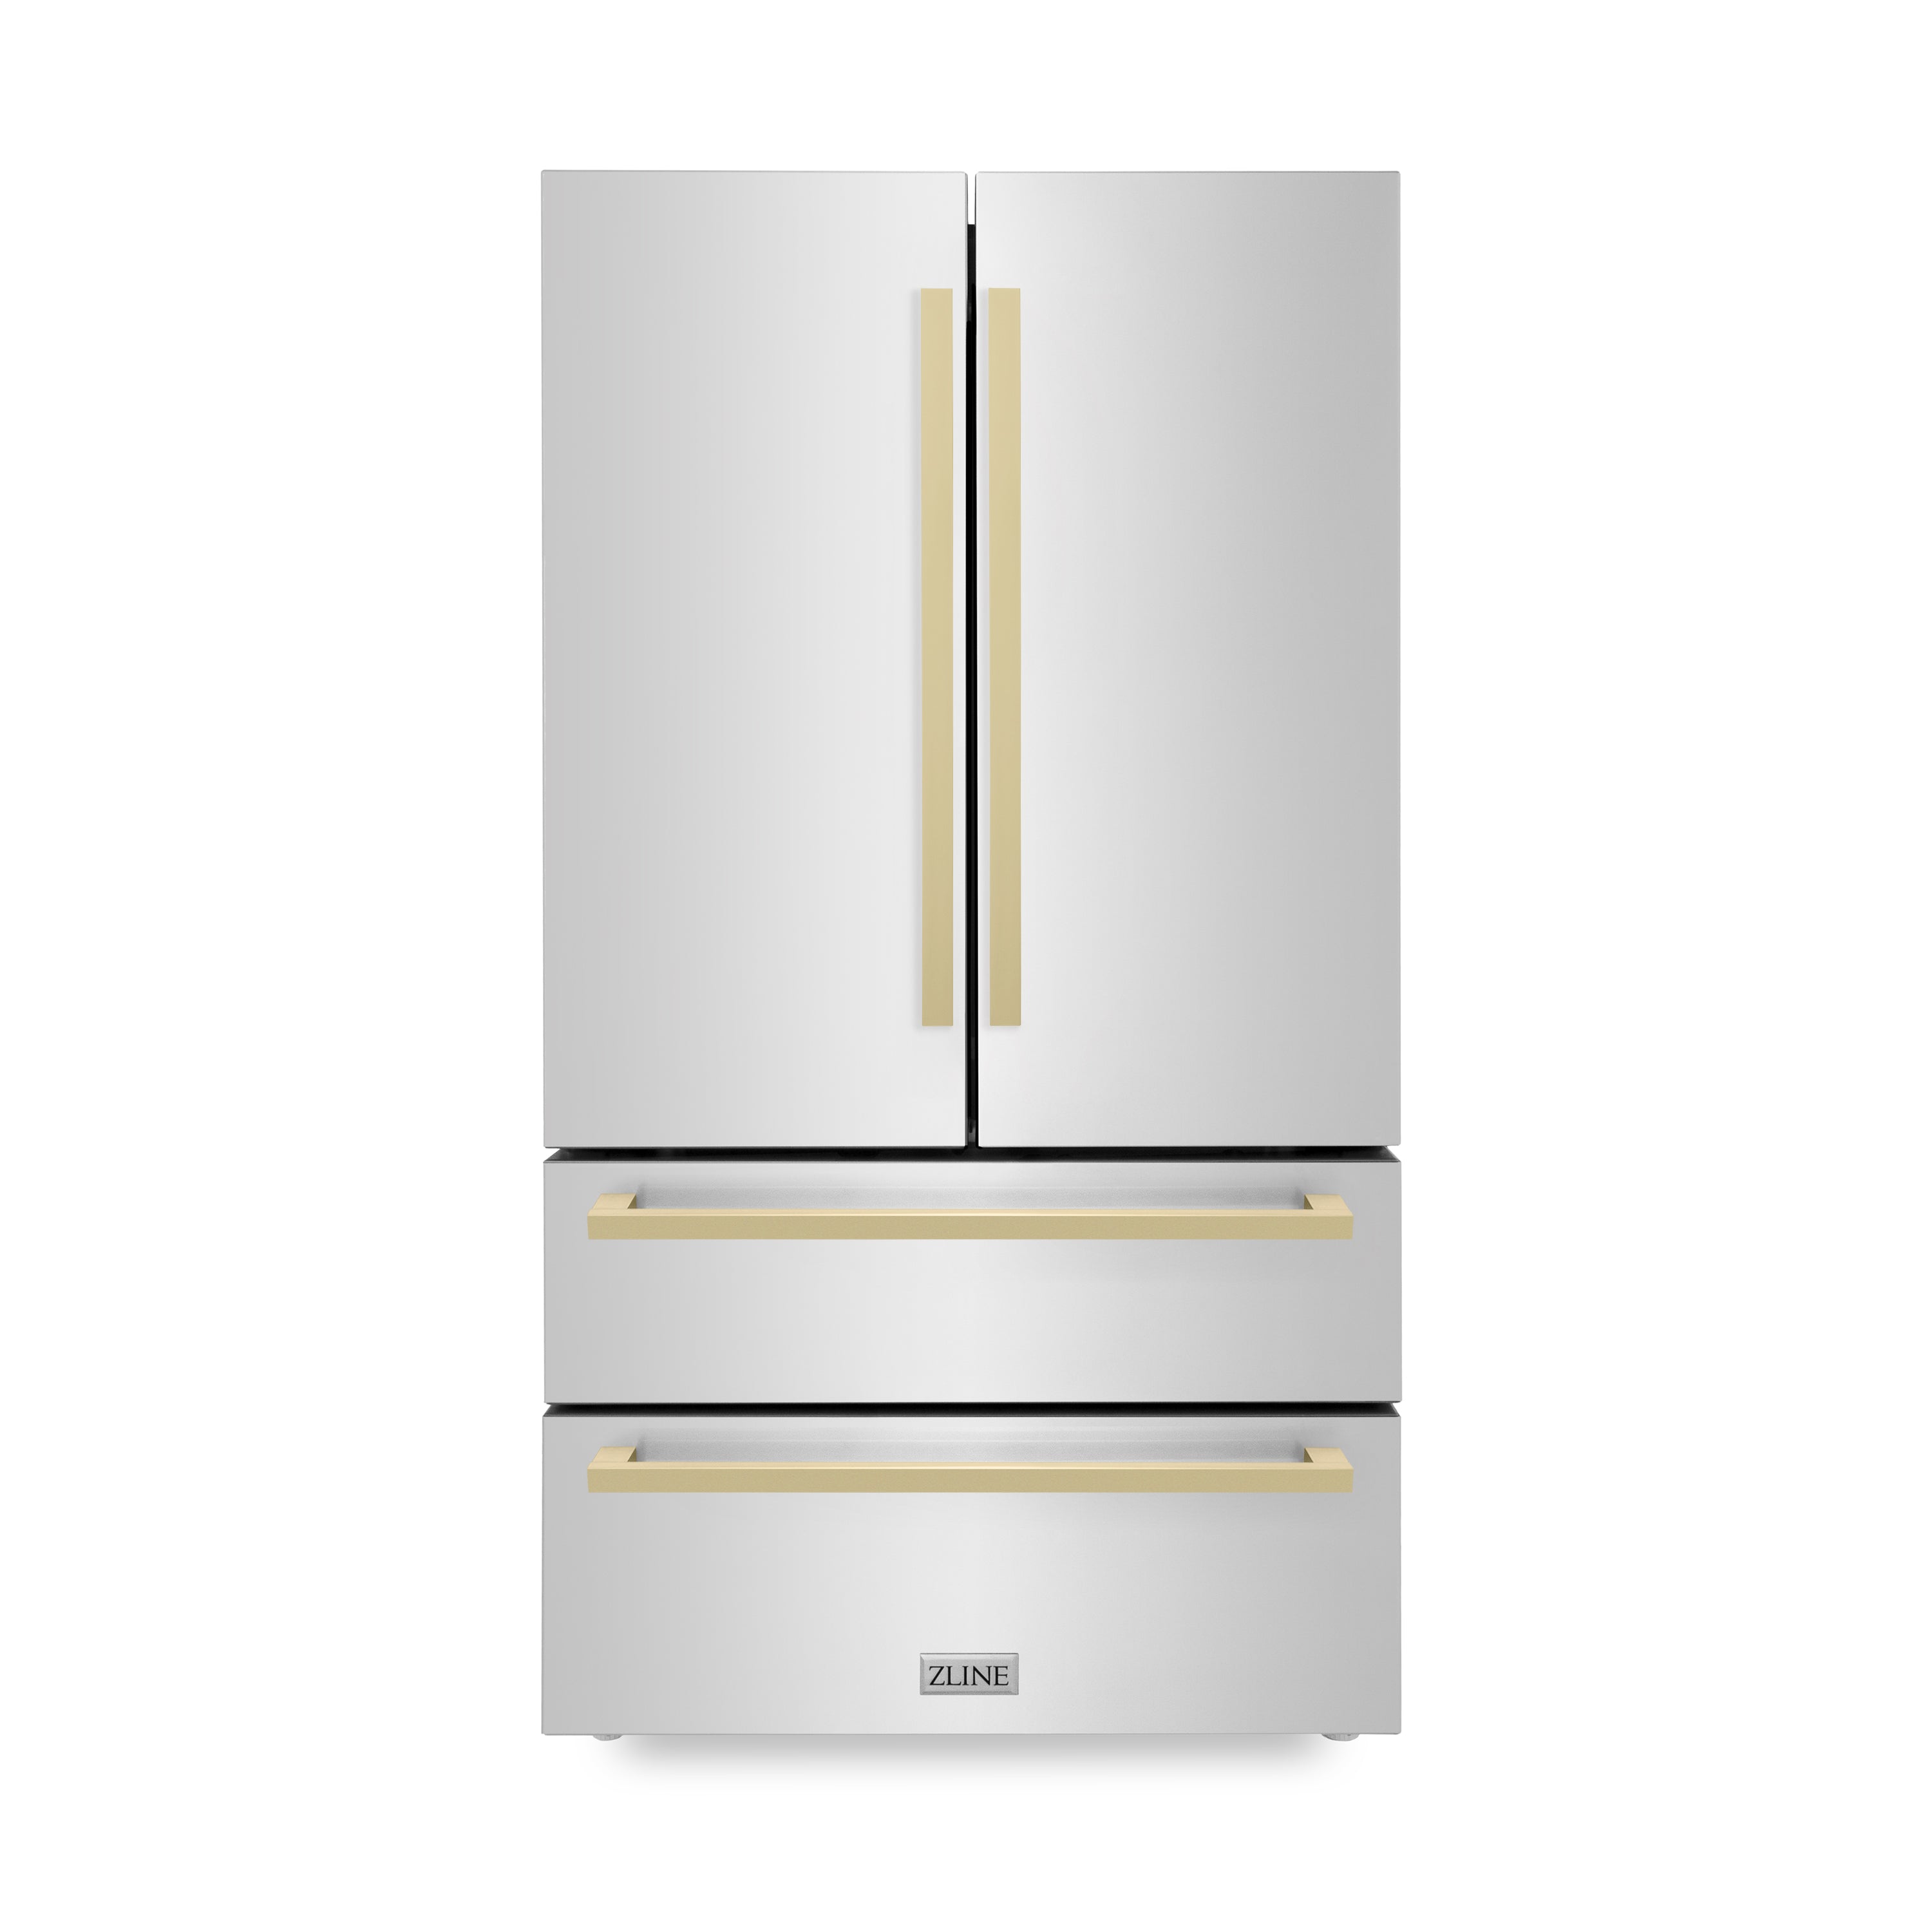 ZLINE 36" Autograph Edition 22.5 cu. ft 4-Door French Door Refrigerator with Ice Maker in Stainless Steel with Champagne Bronze Square Handles (RFMZ-36-FCB)